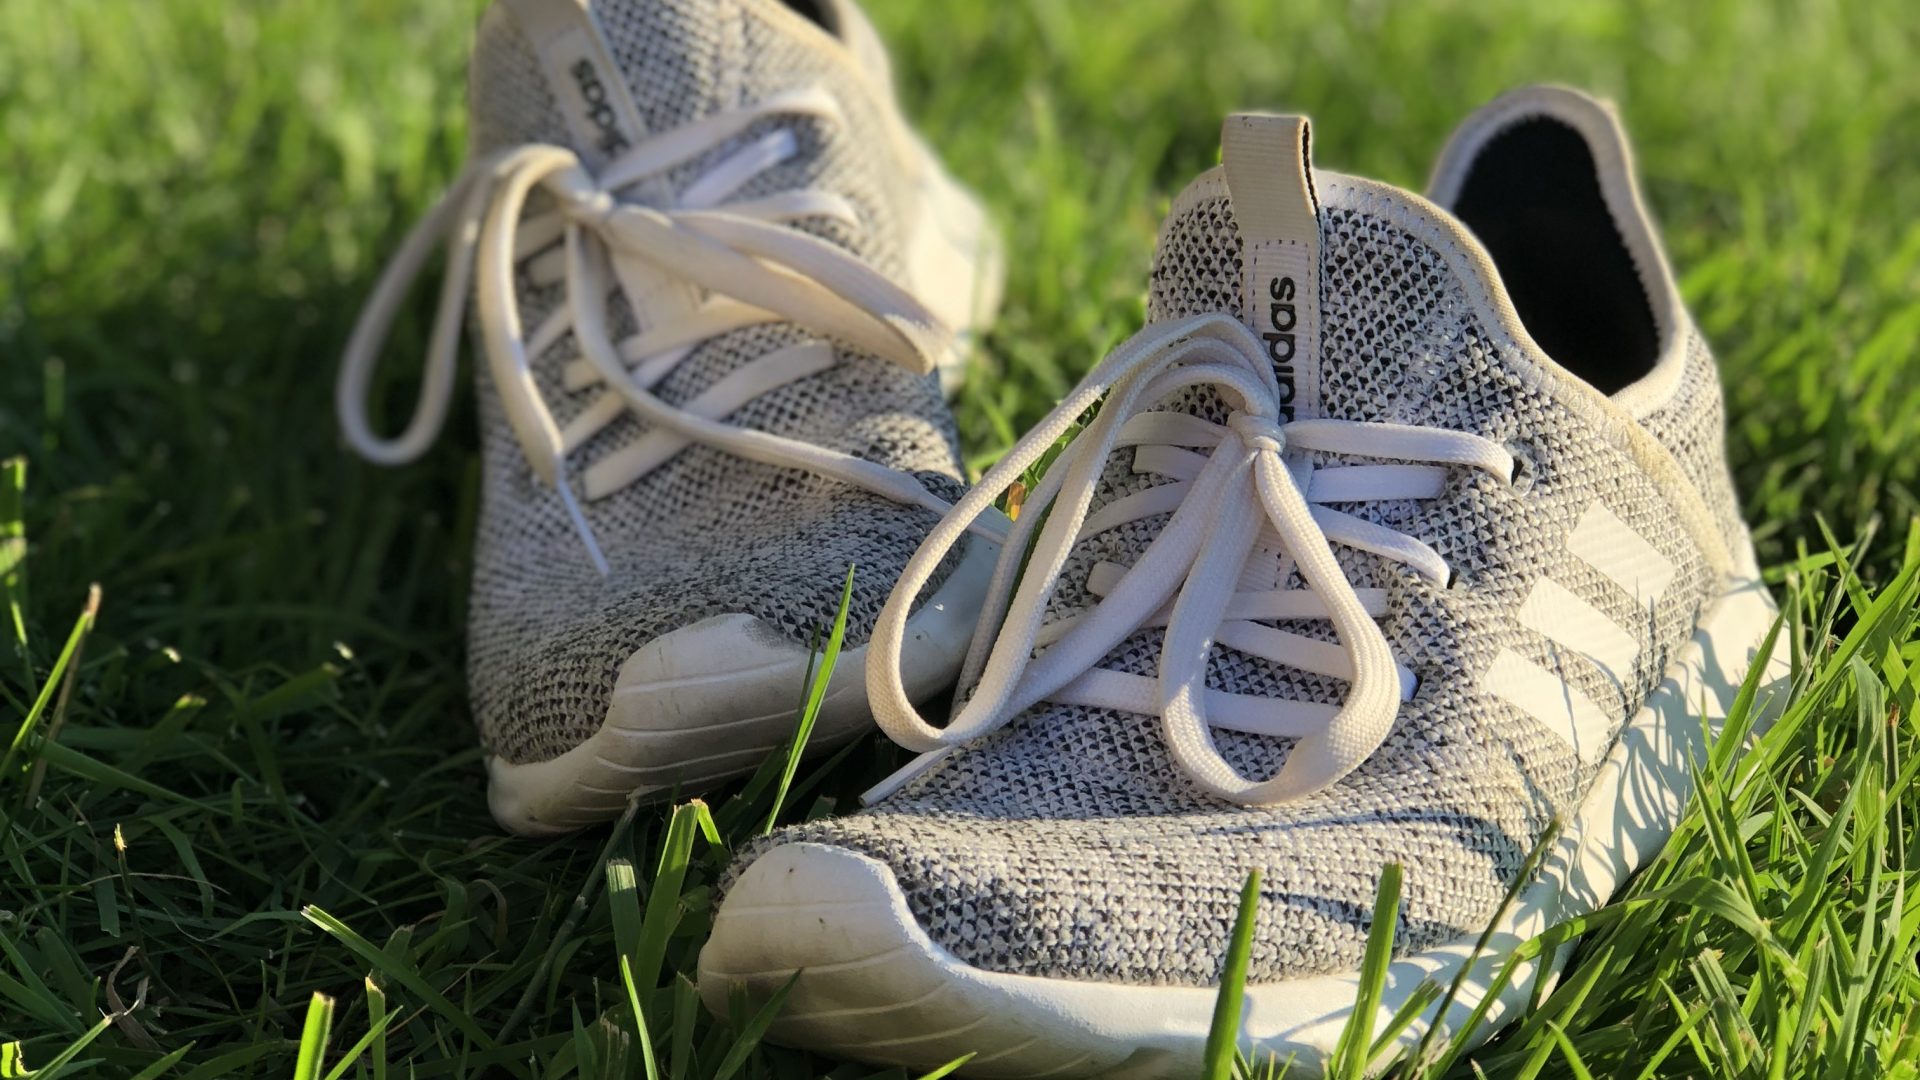 white and grey running shoes laying on grass.